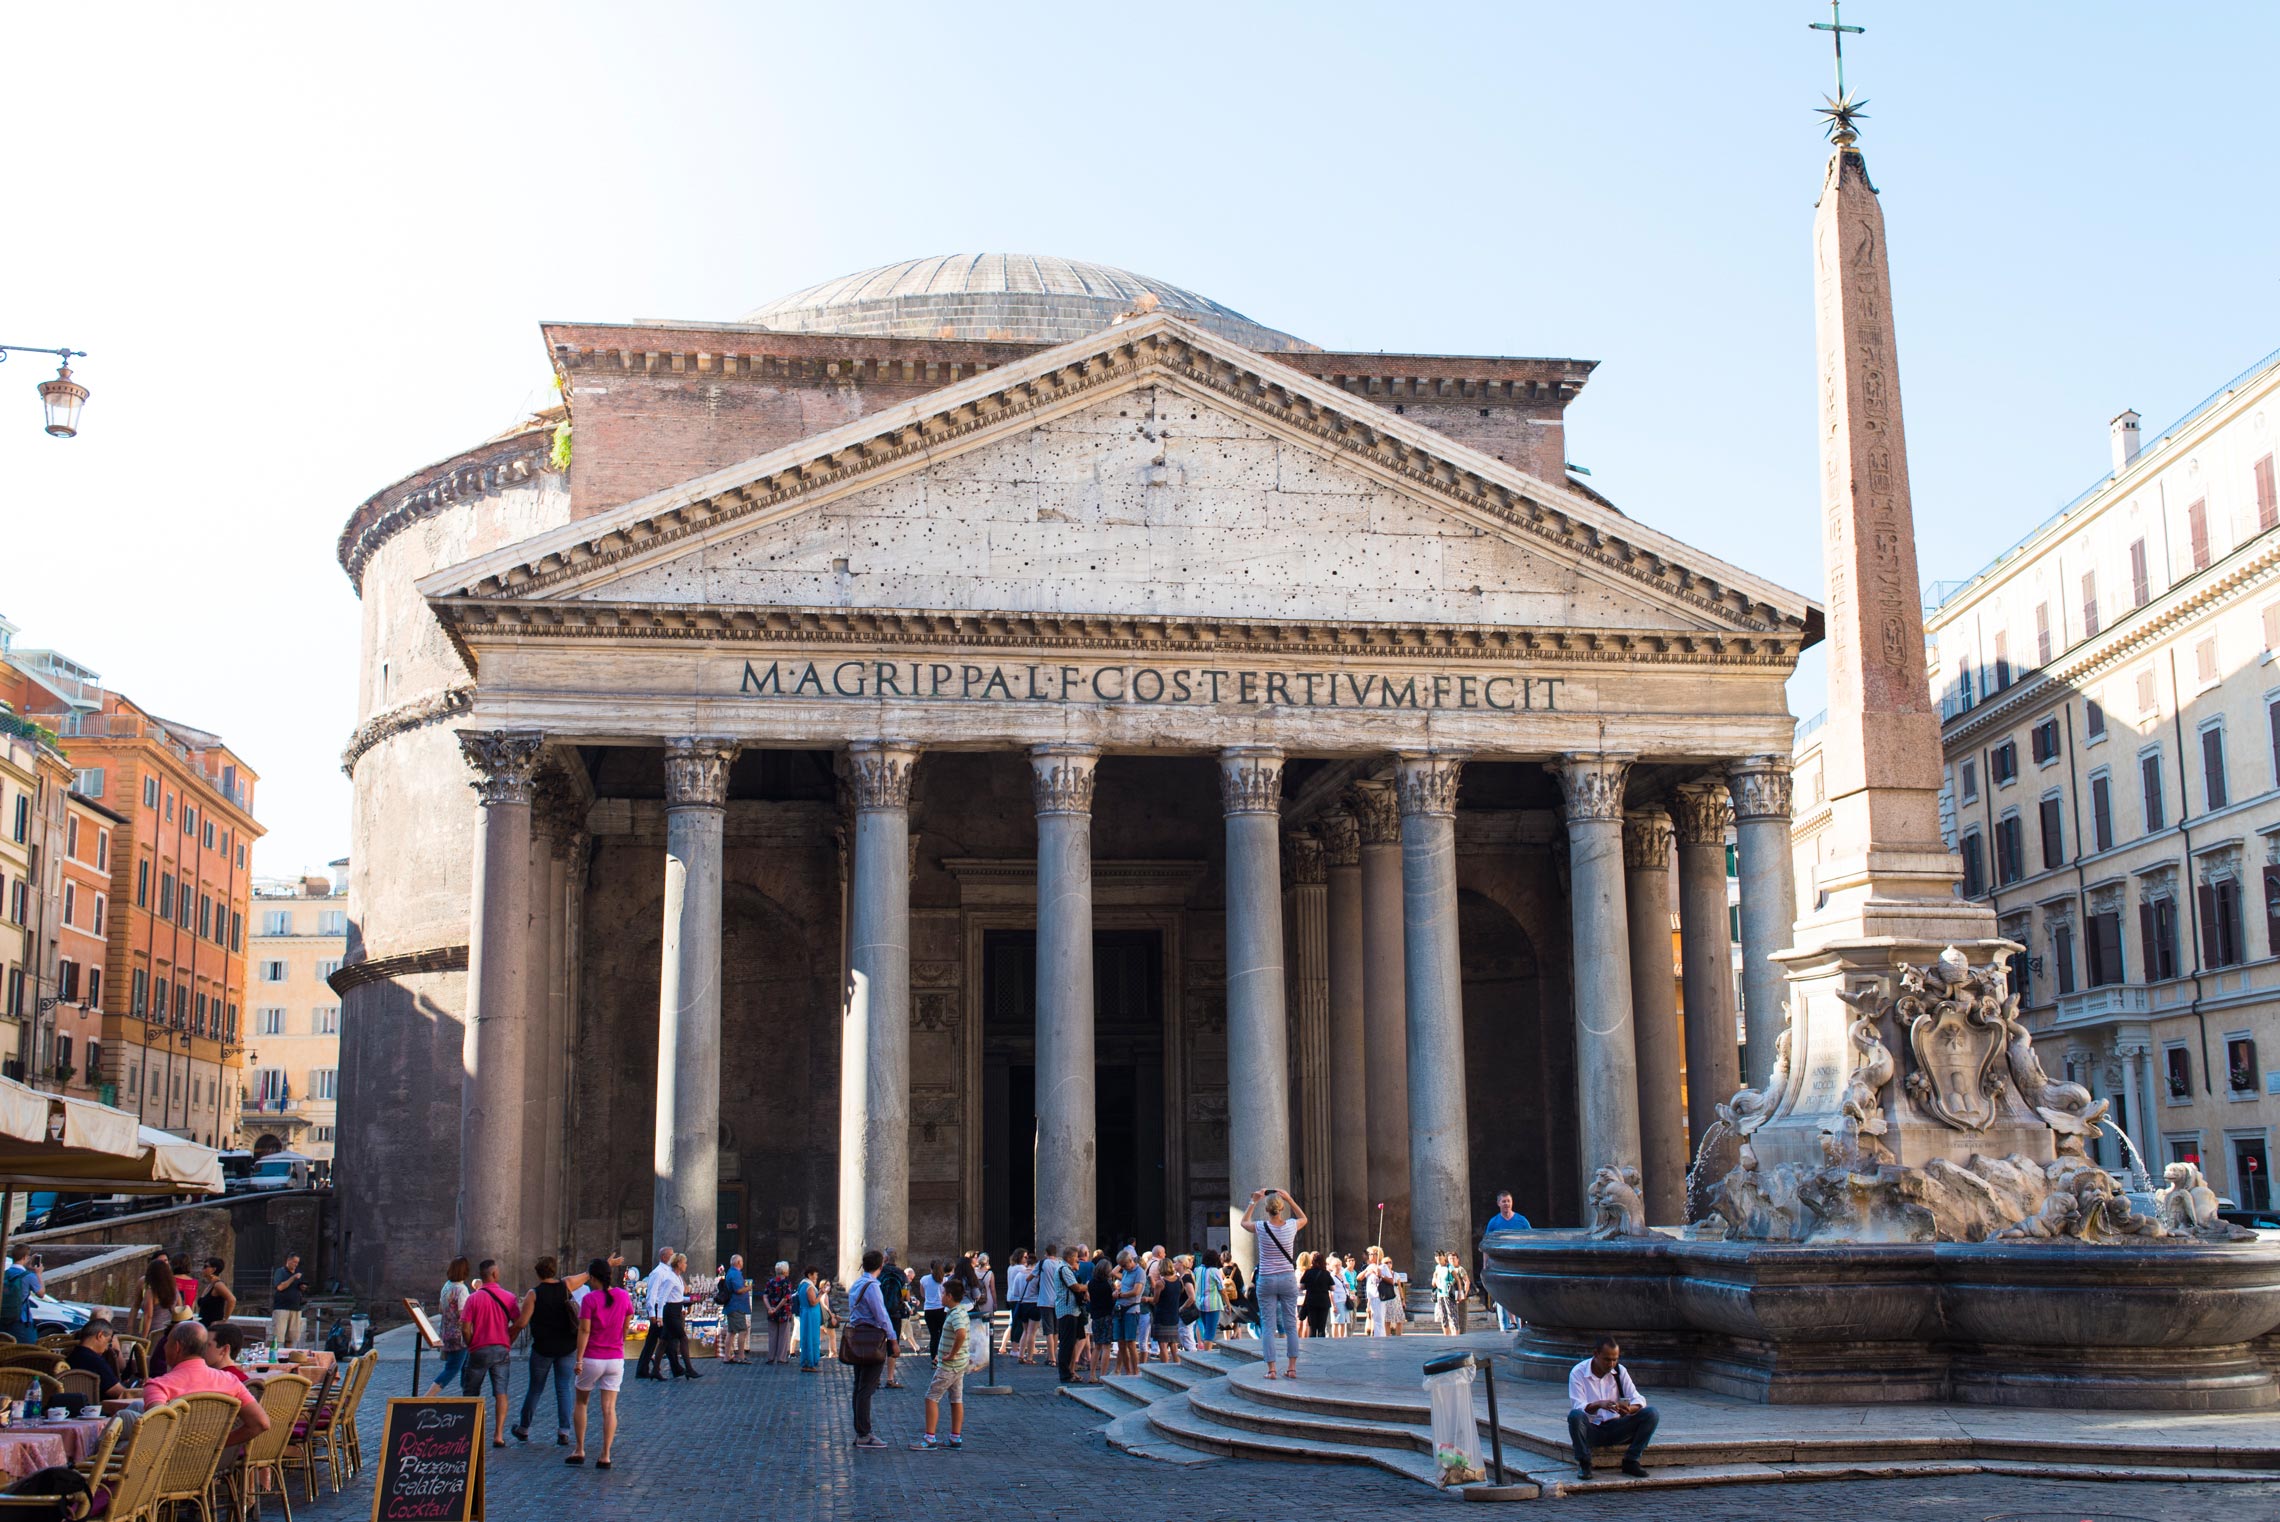 The Best Free Things to do in Rome, Pantheon